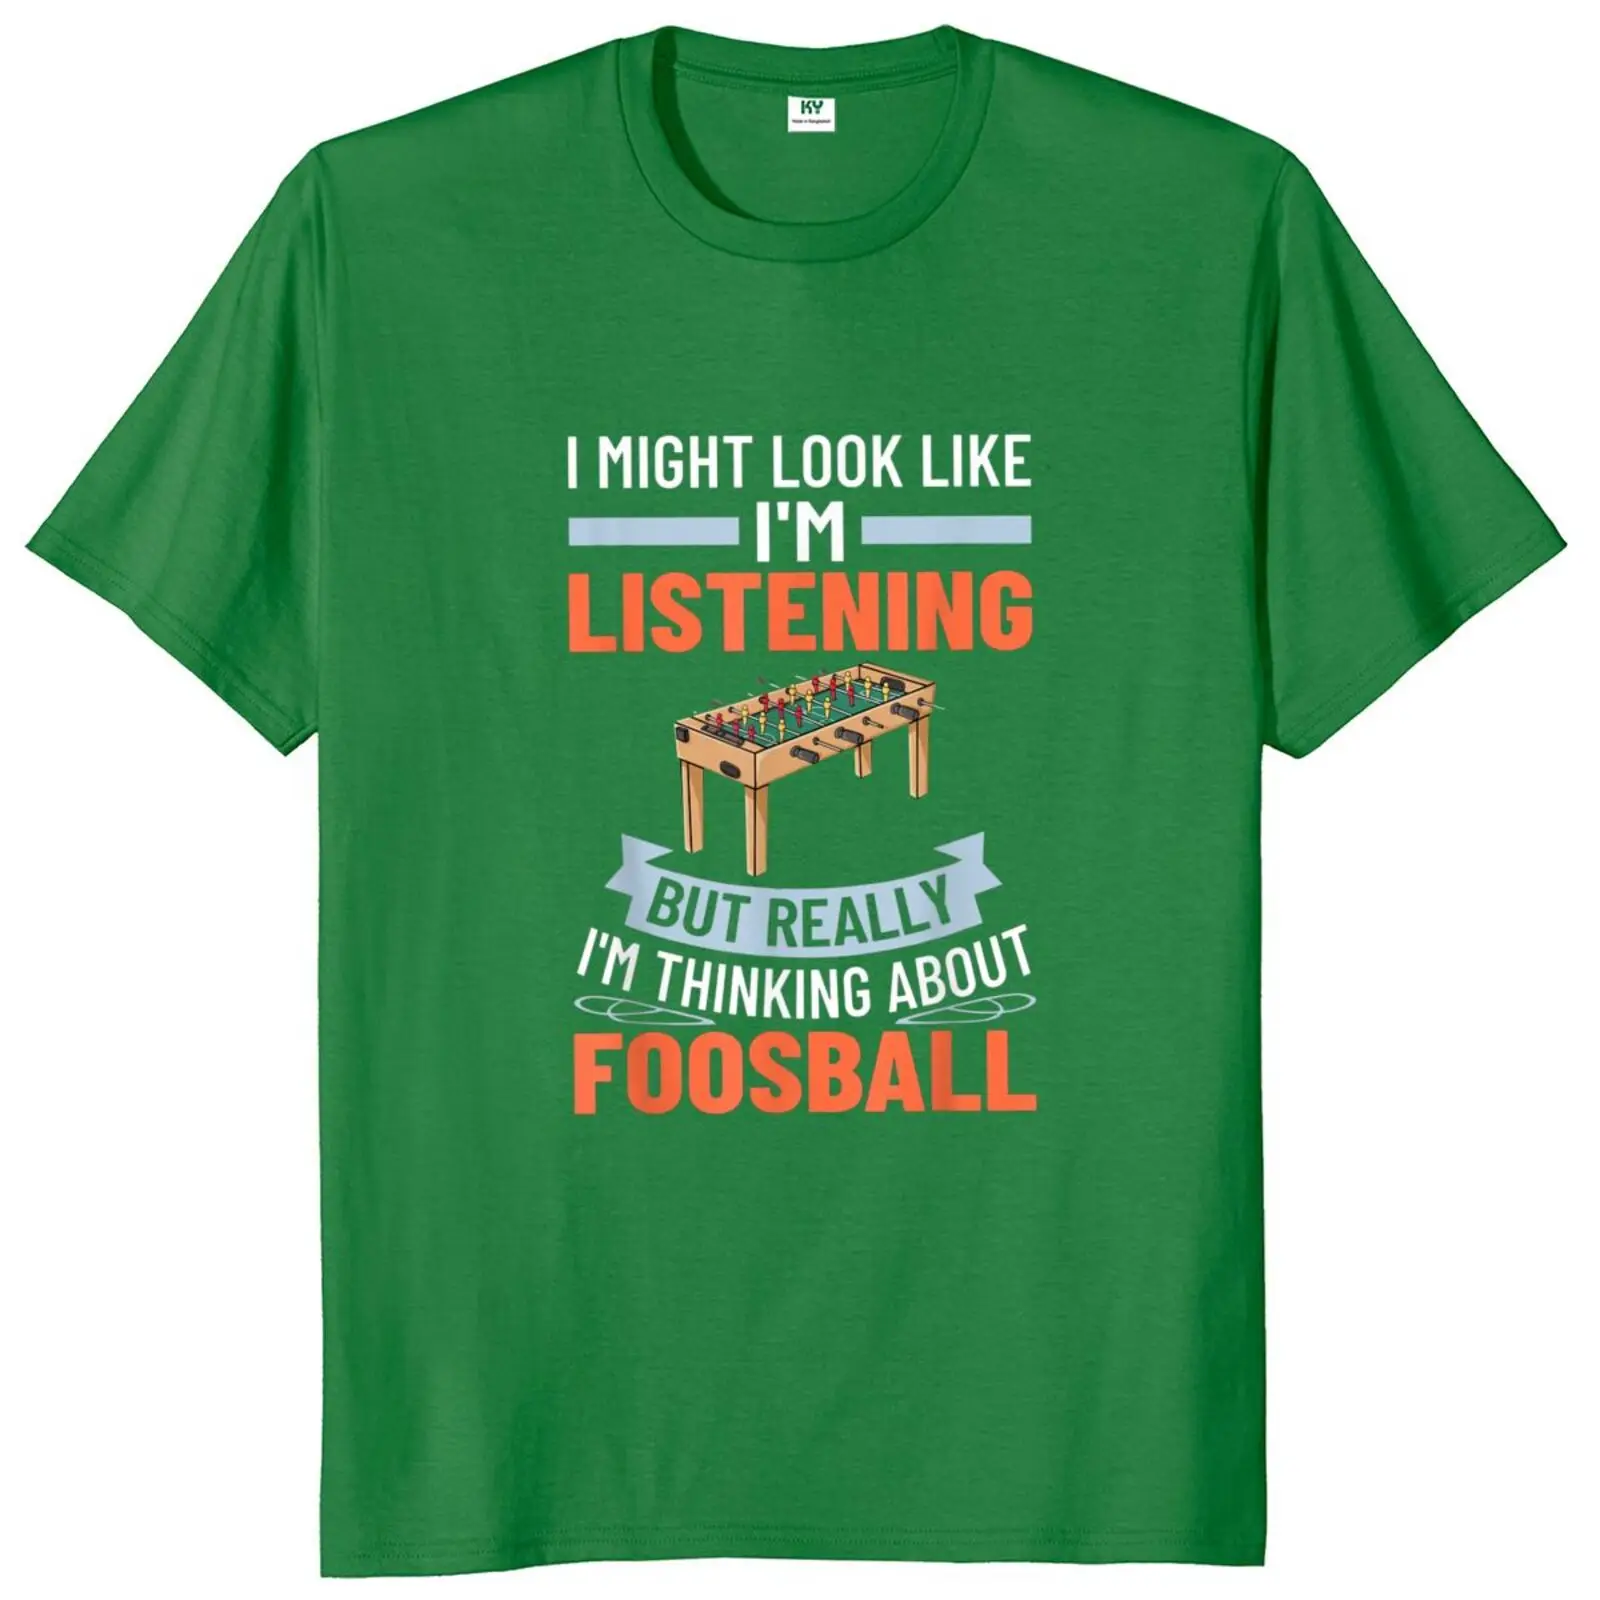 Foosball T-Shirt Funny Outdoor Player Ball Lovers VintageT Shirt Premium Summer Soft 100% Cotton Men's Clothing EU Size fred perry t shirt T-Shirts